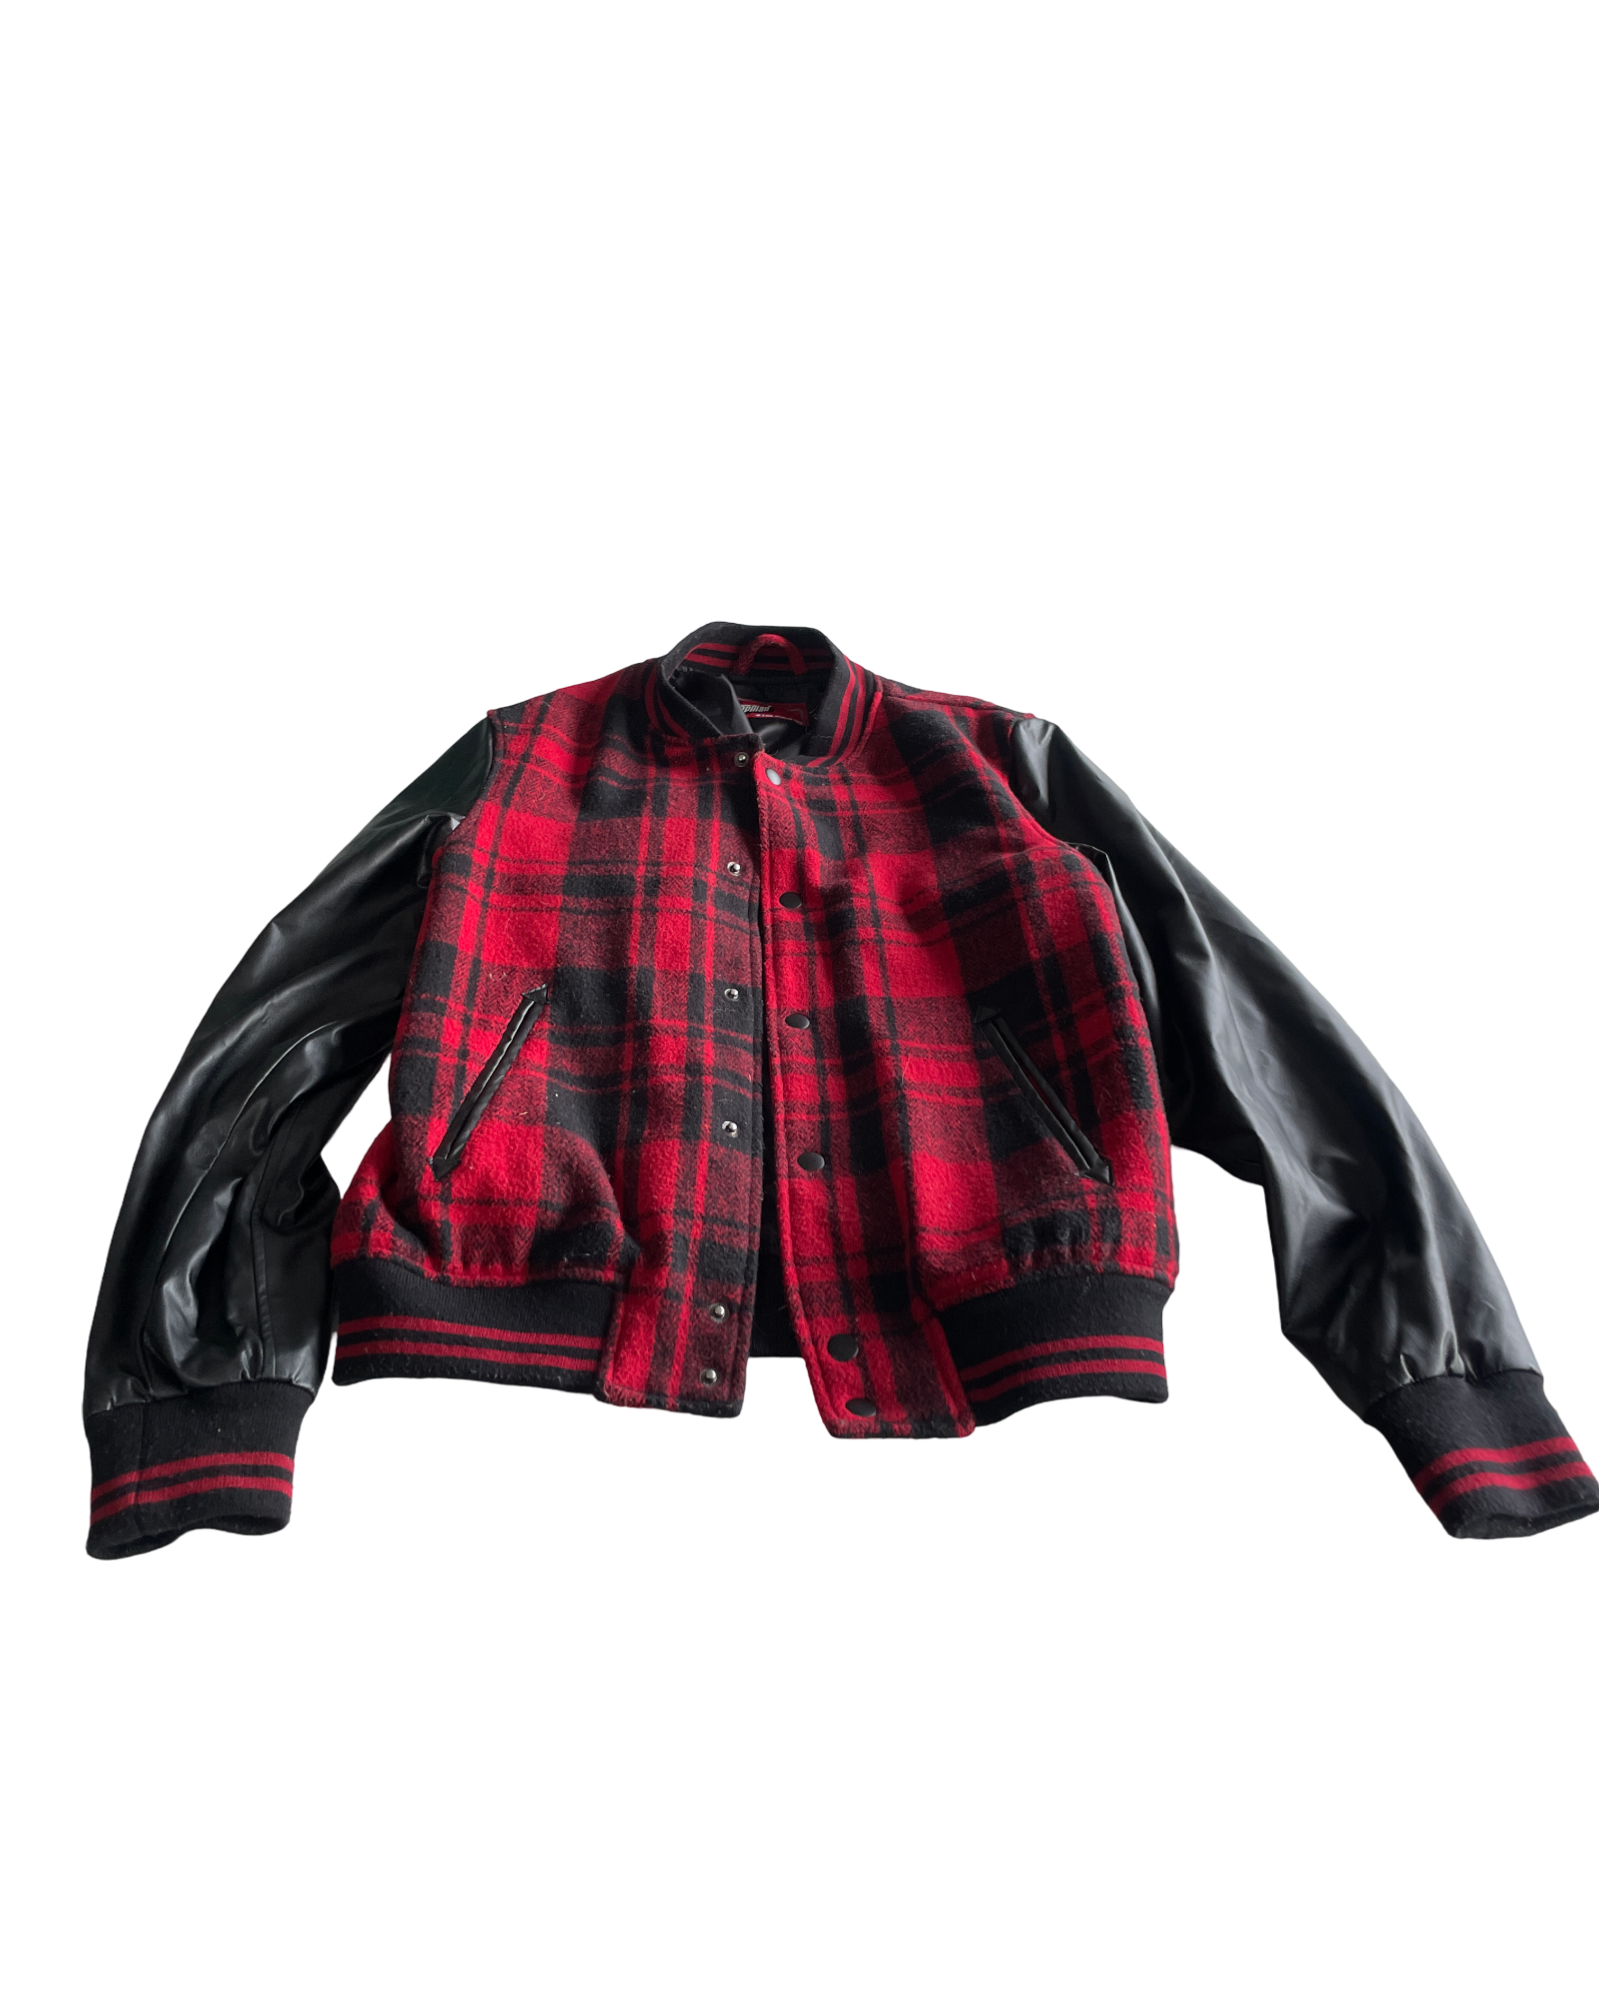 Tartan Red Topman Checkered Leather Jacket - Size Small (SKU 4619)